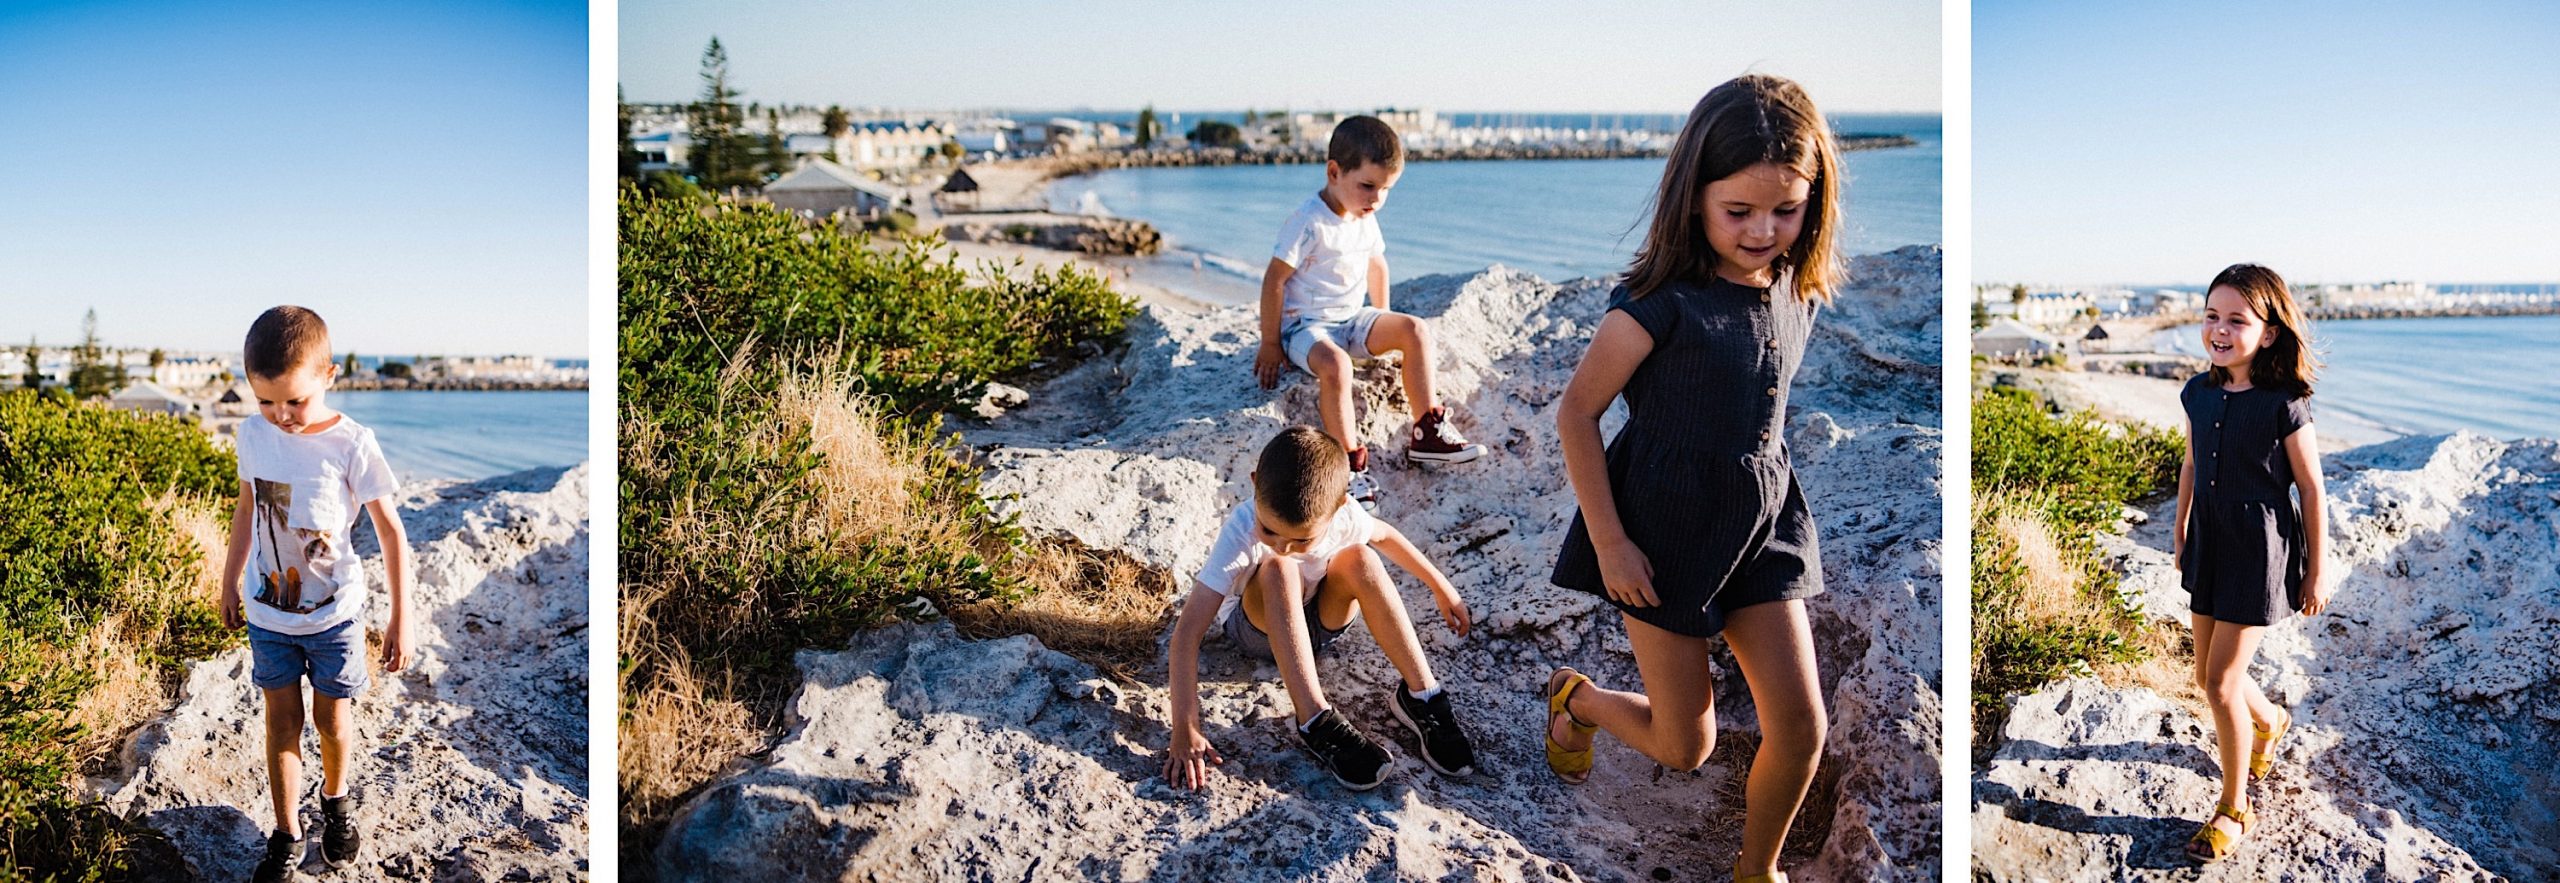 Candid family photos of three siblings playing on rocky outcrops looking over Bathers Beach, Fremantle.